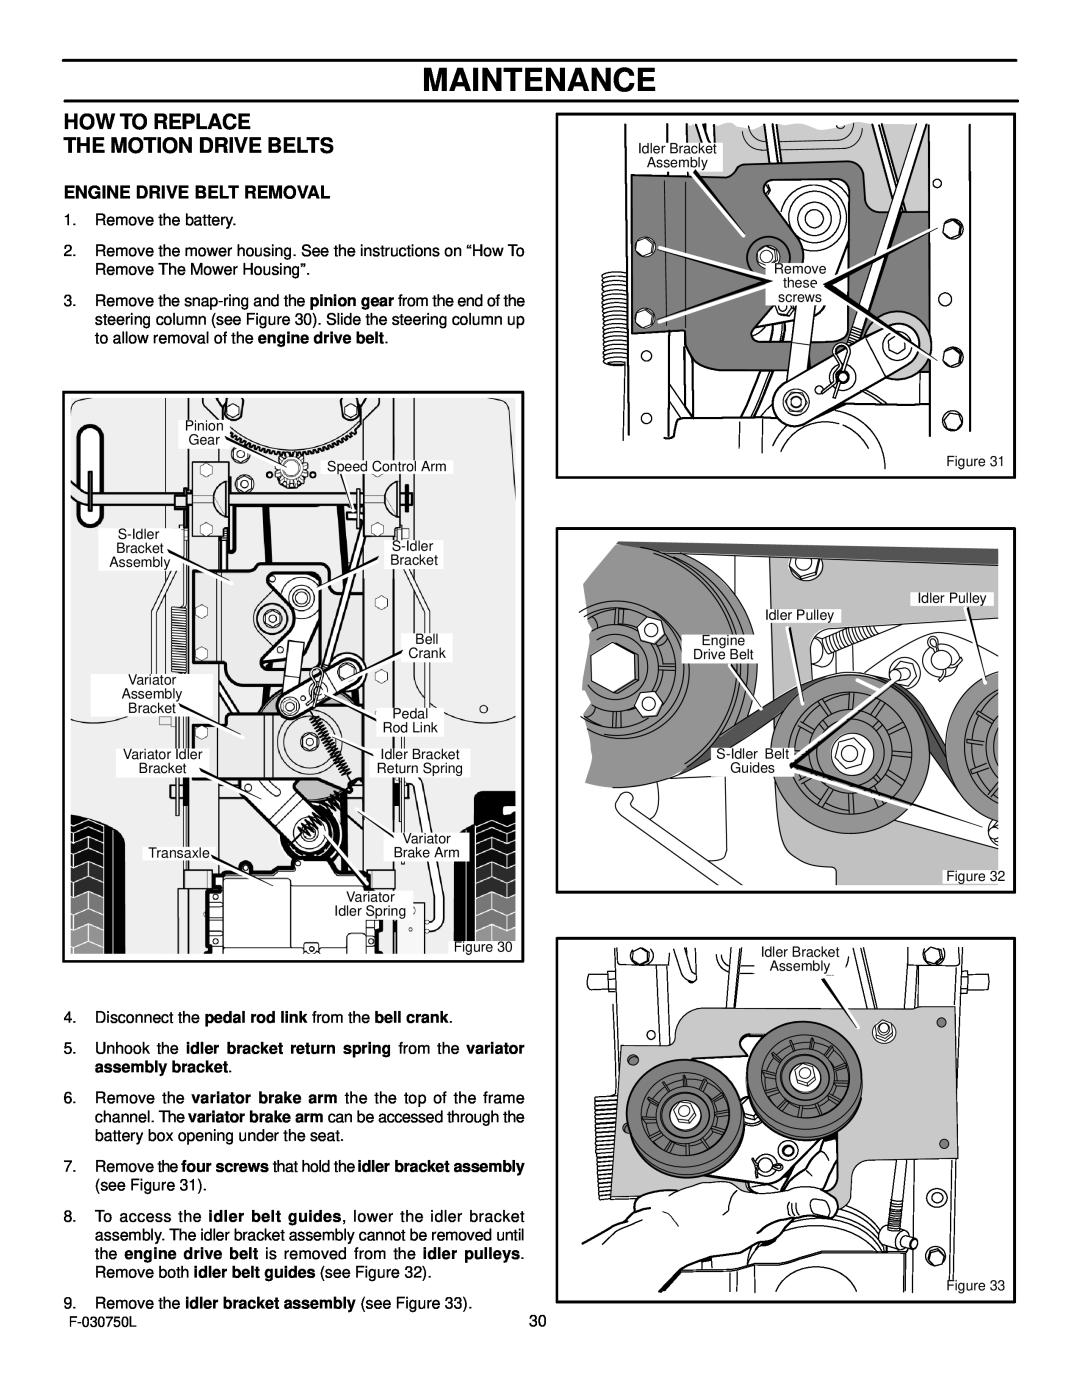 Murray 425306x48A manual Maintenance, How To Replace The Motion Drive Belts, Engine Drive Belt Removal 